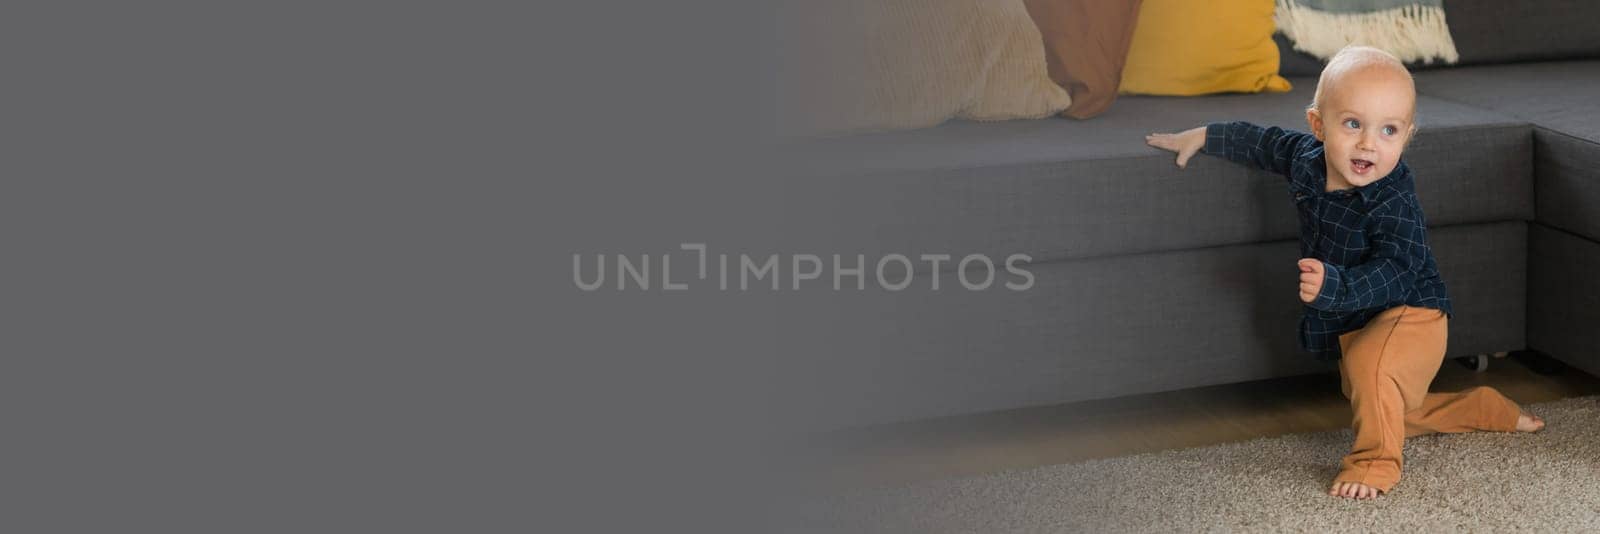 Banner Toddler boy laughing having fun standing near sofa in living room at home copy space. Adorable baby making first steps alone. Happy childhood and child care concept by Satura86